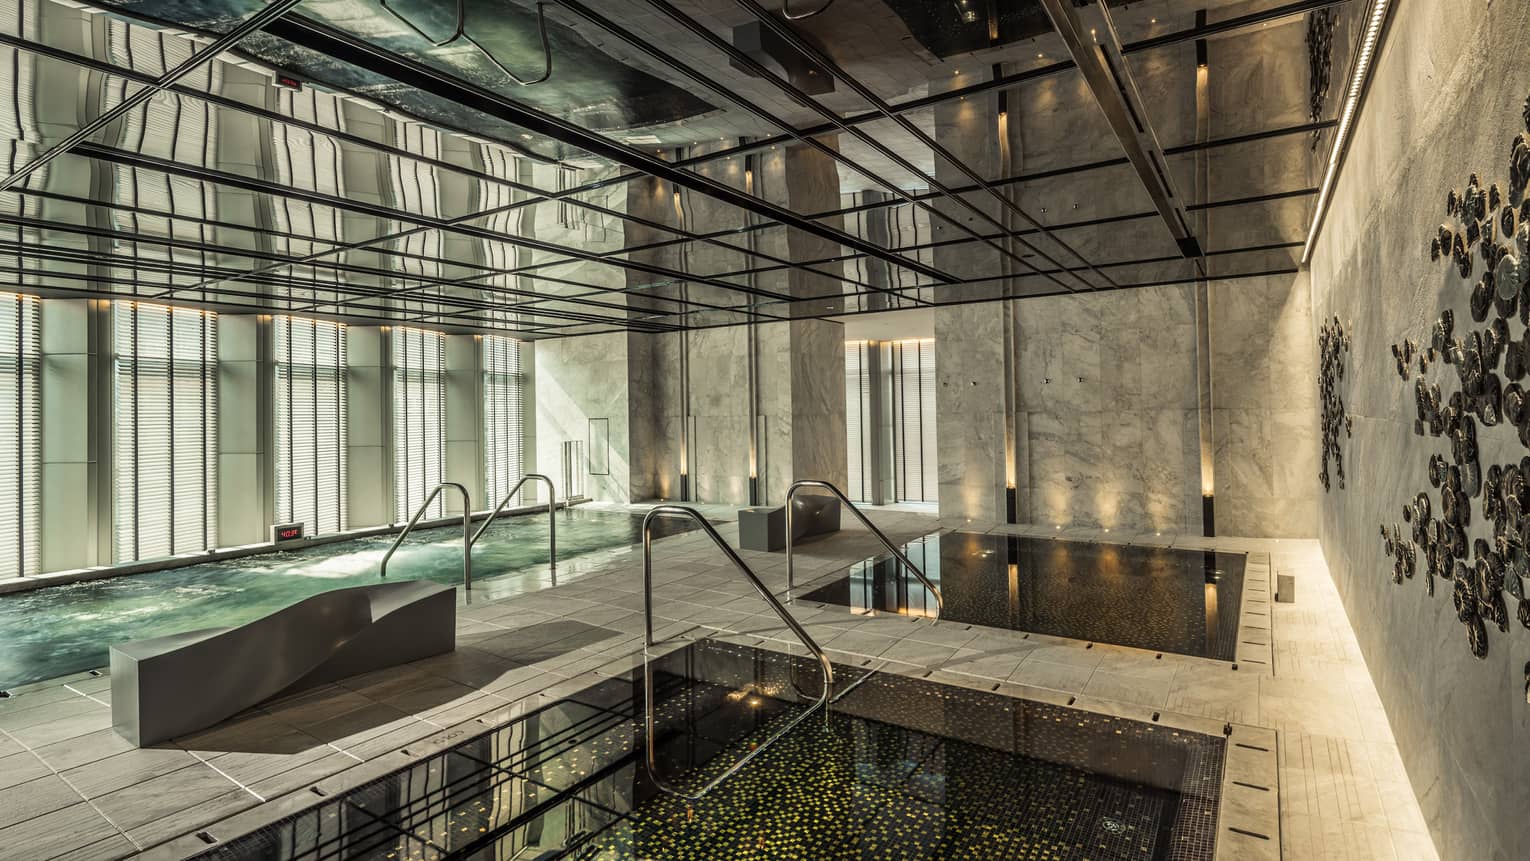 Two indoor pools, vitality pool on tile deck surrounded by marble walls, windows